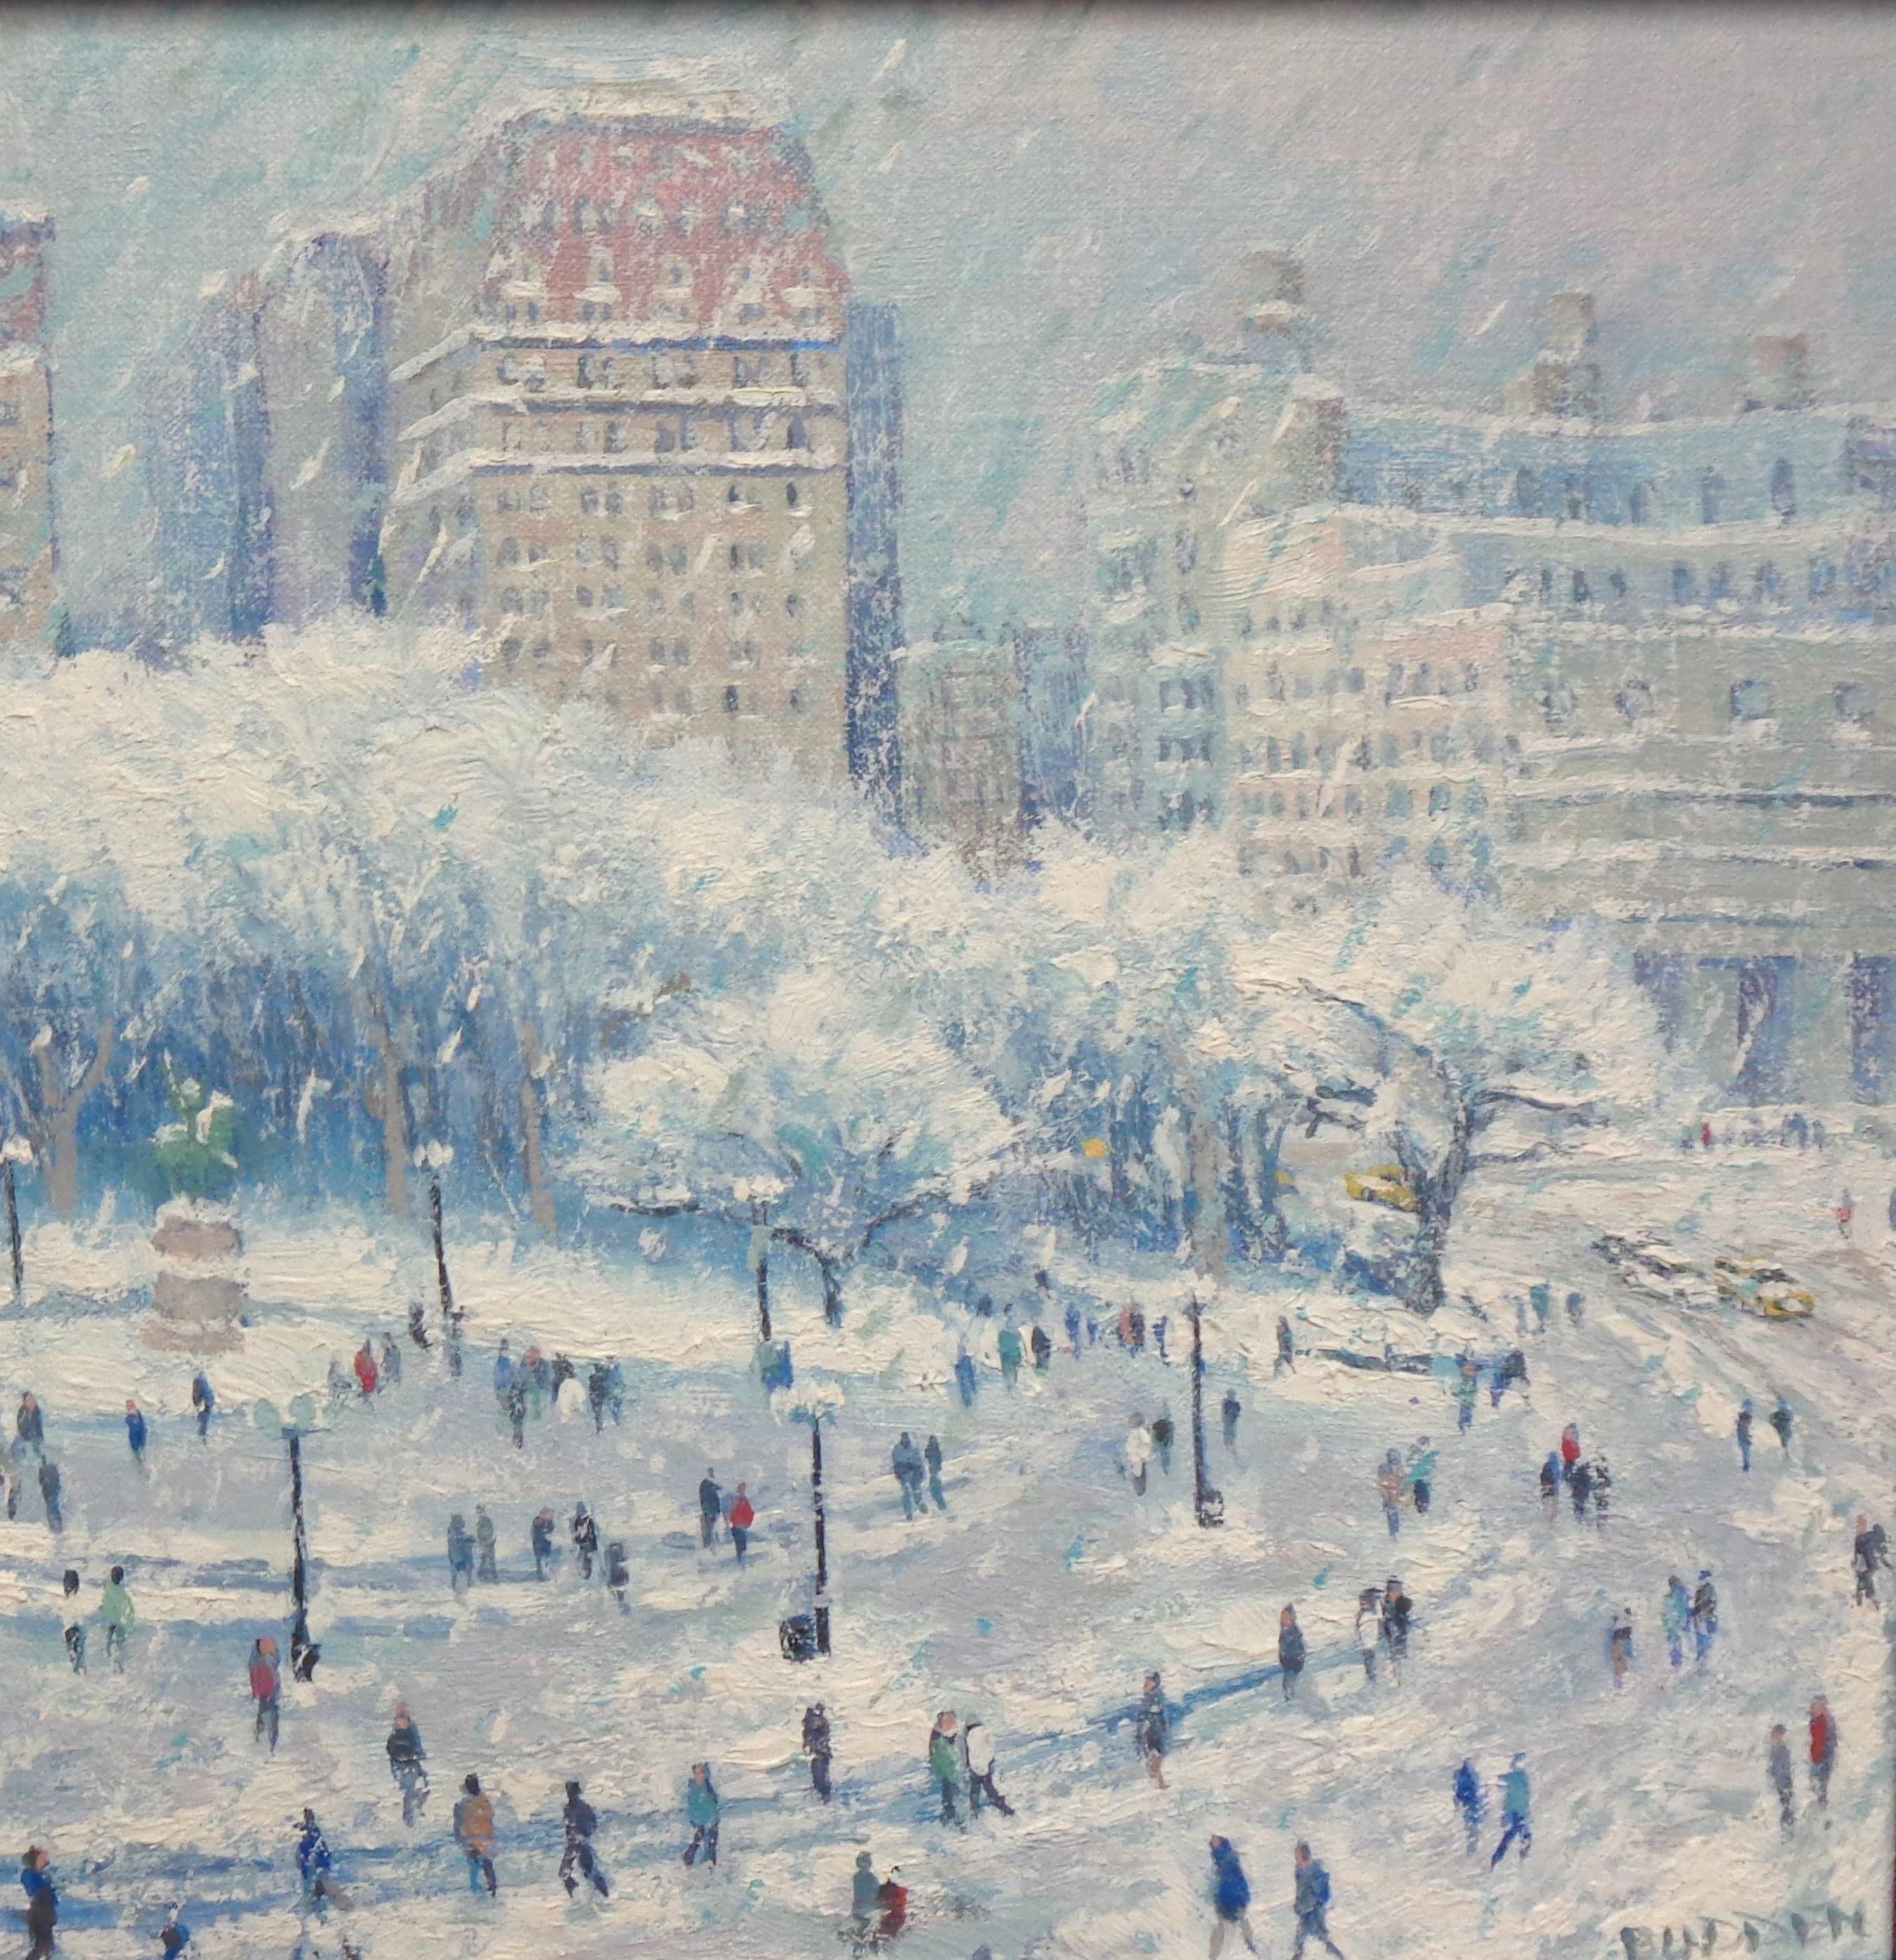  New York City Snow Oil Painting Michael Budden Winter Union Square For Sale 3